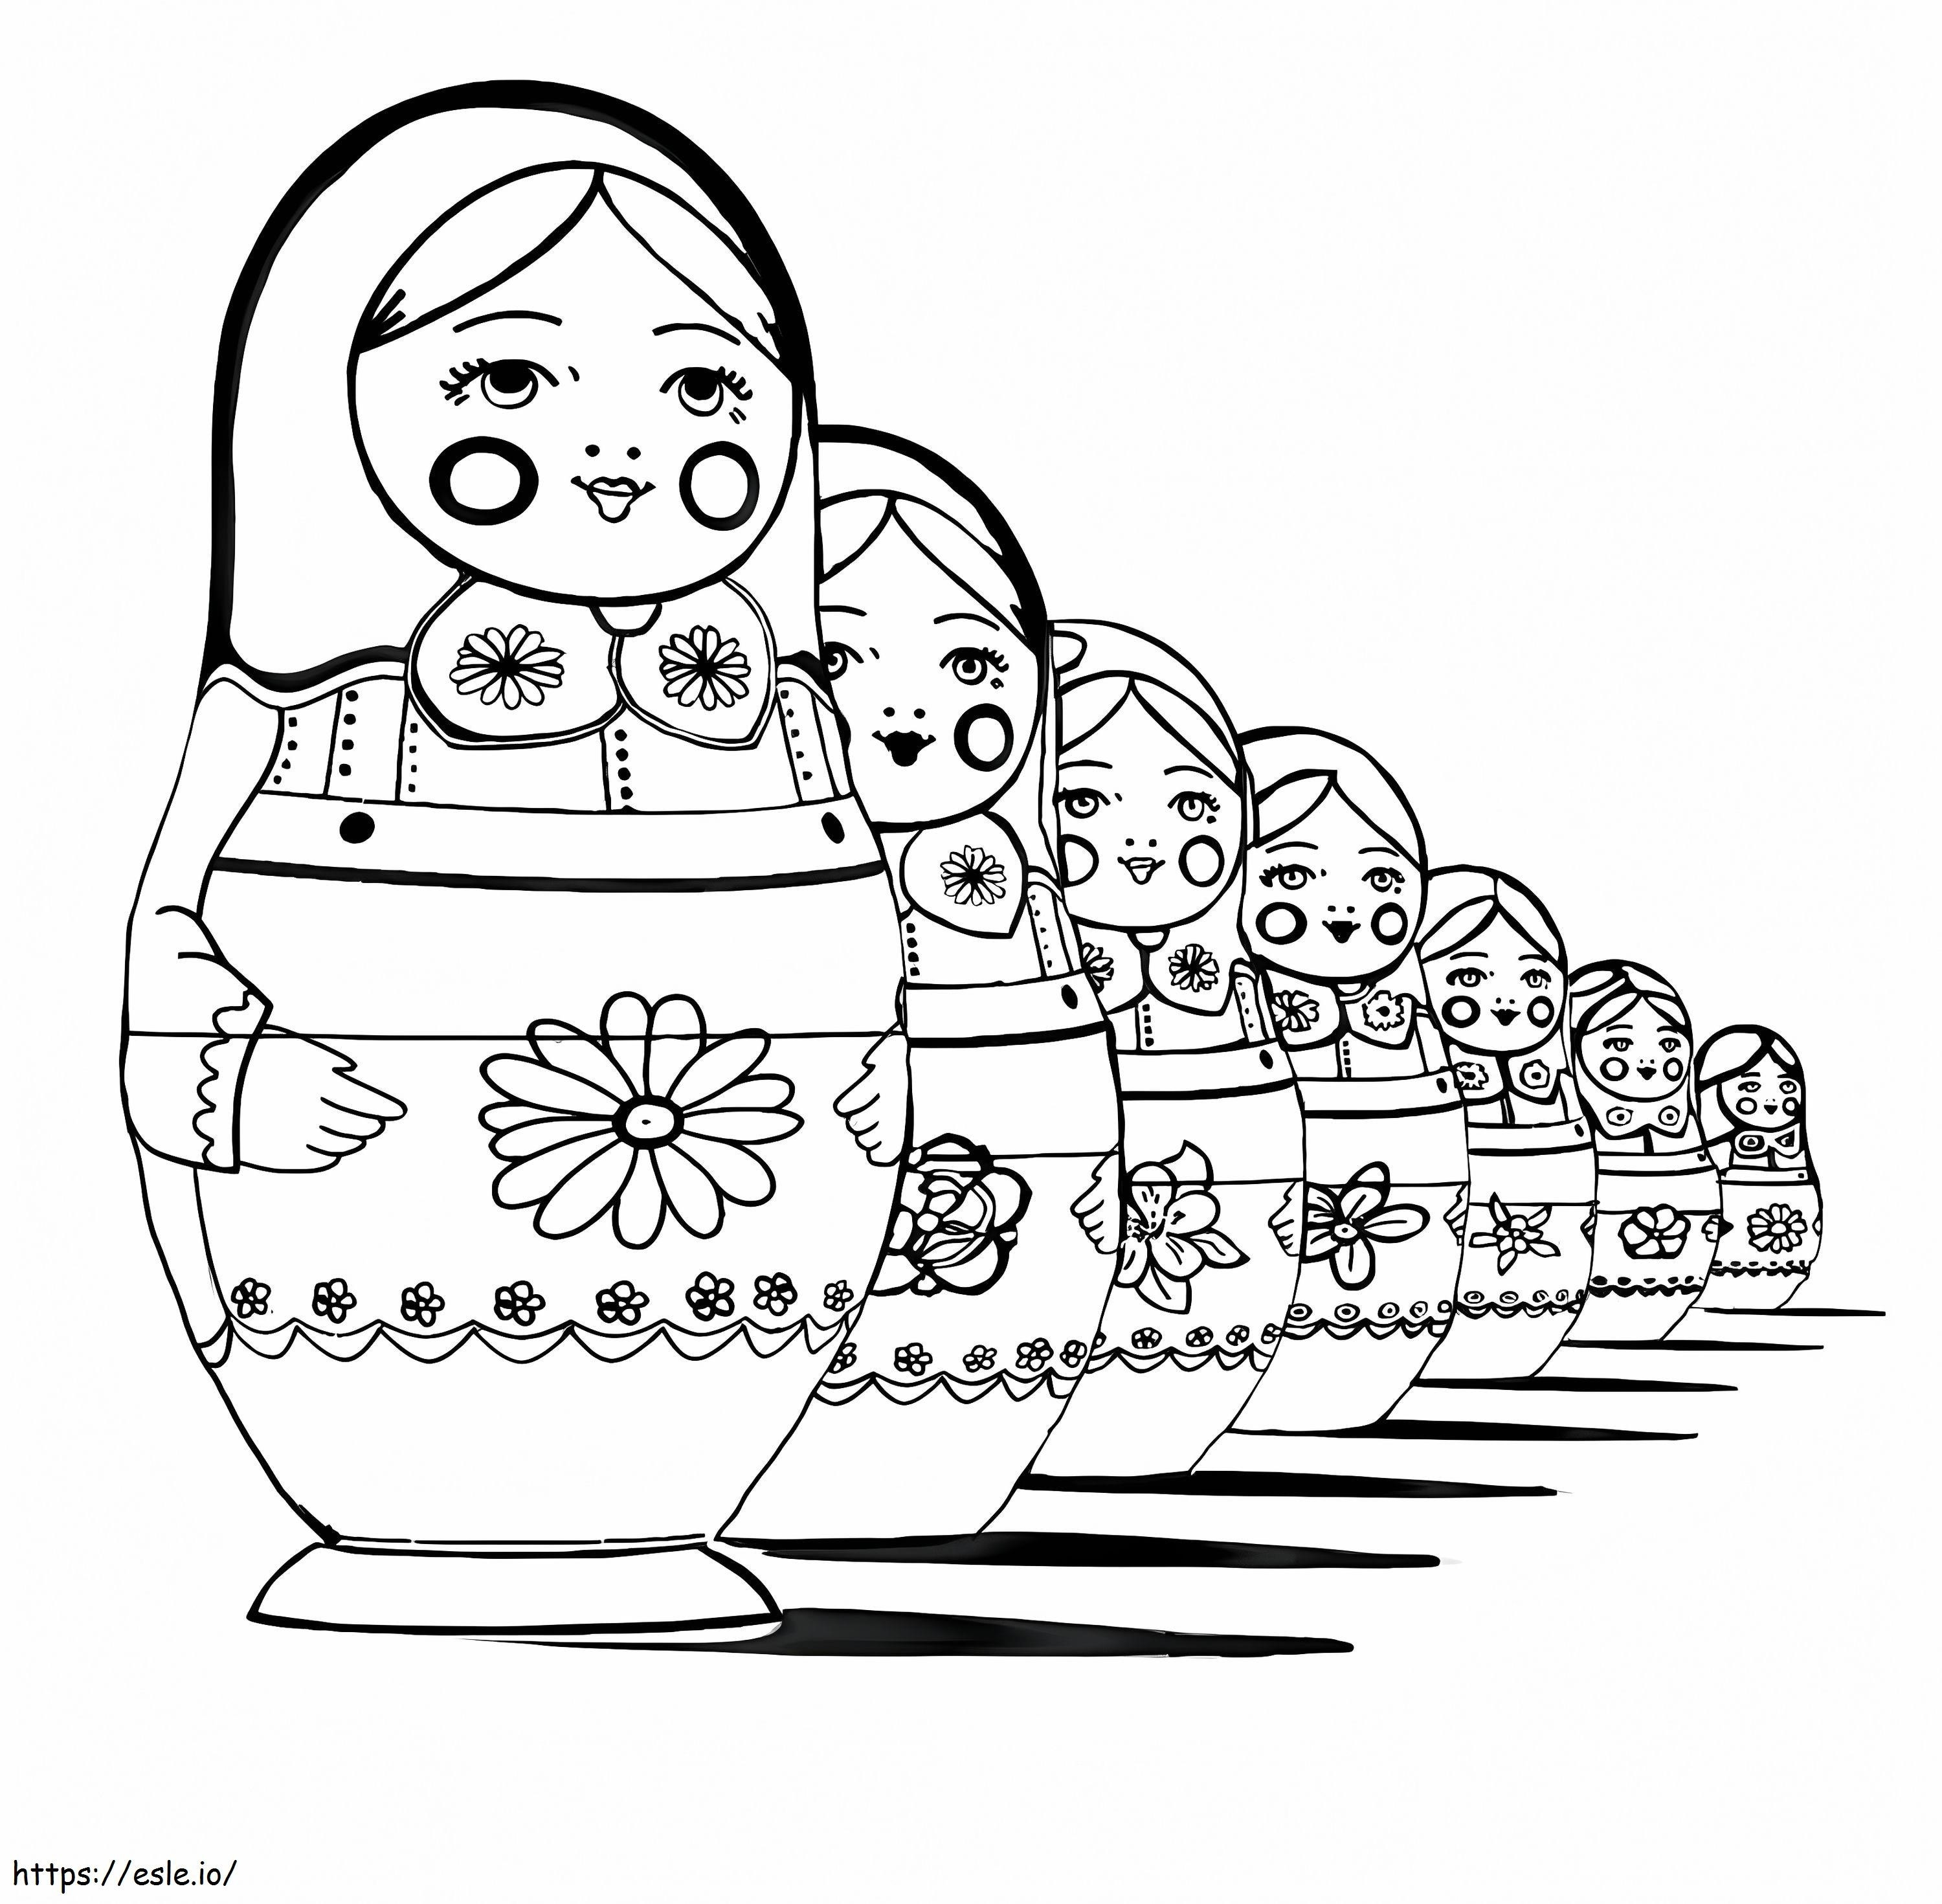 Russian Dolls Printable coloring page